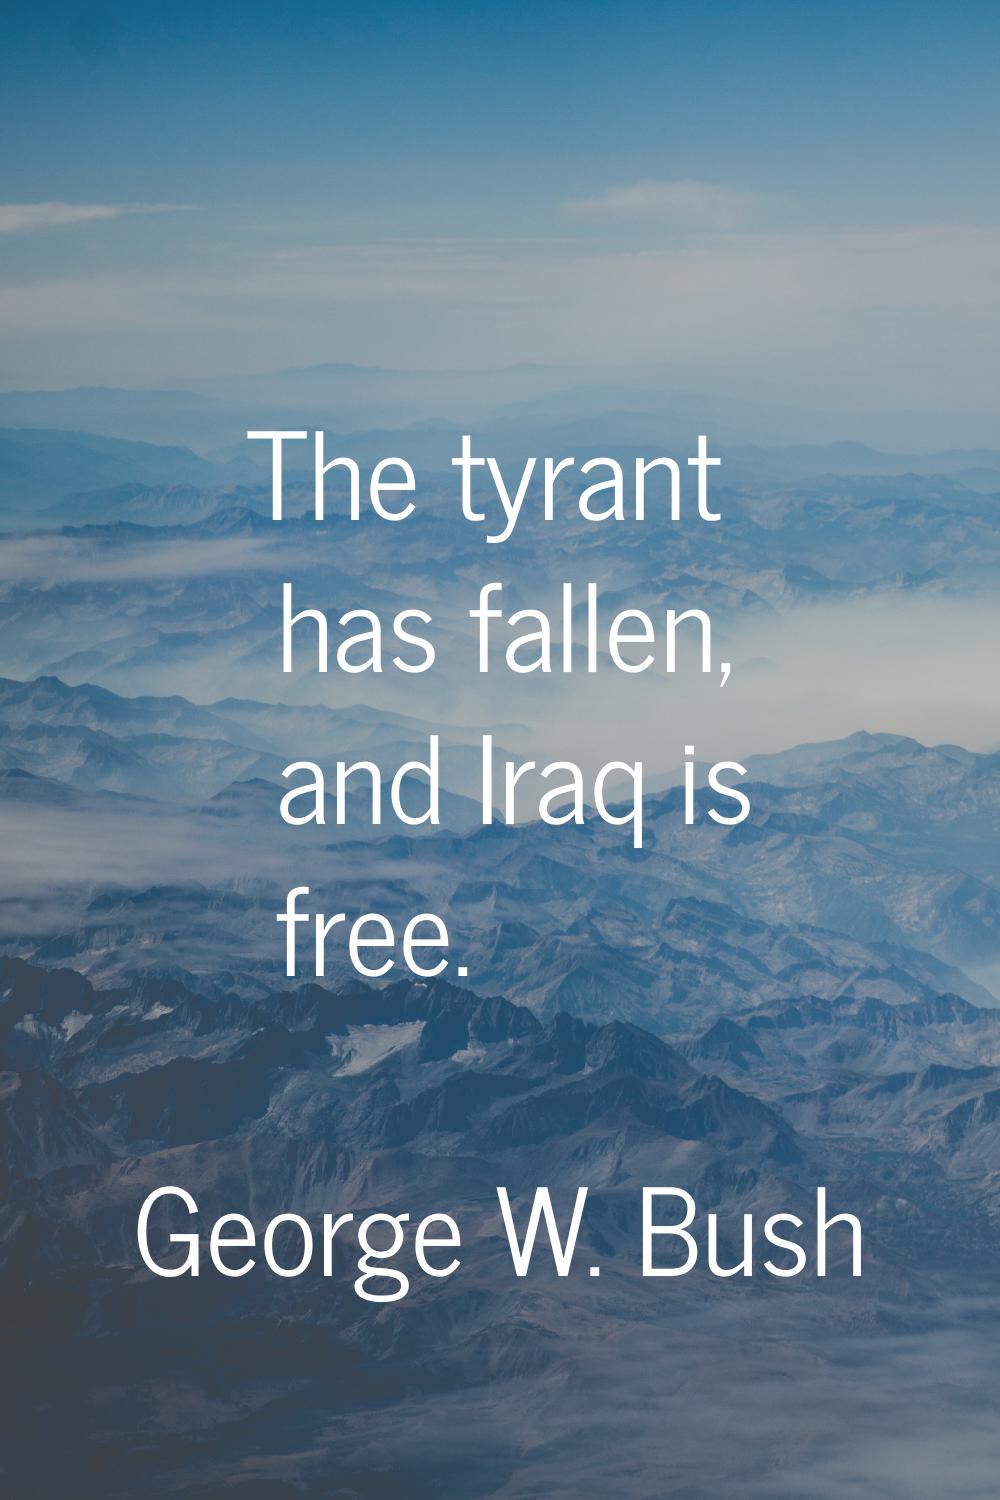 The tyrant has fallen, and Iraq is free.